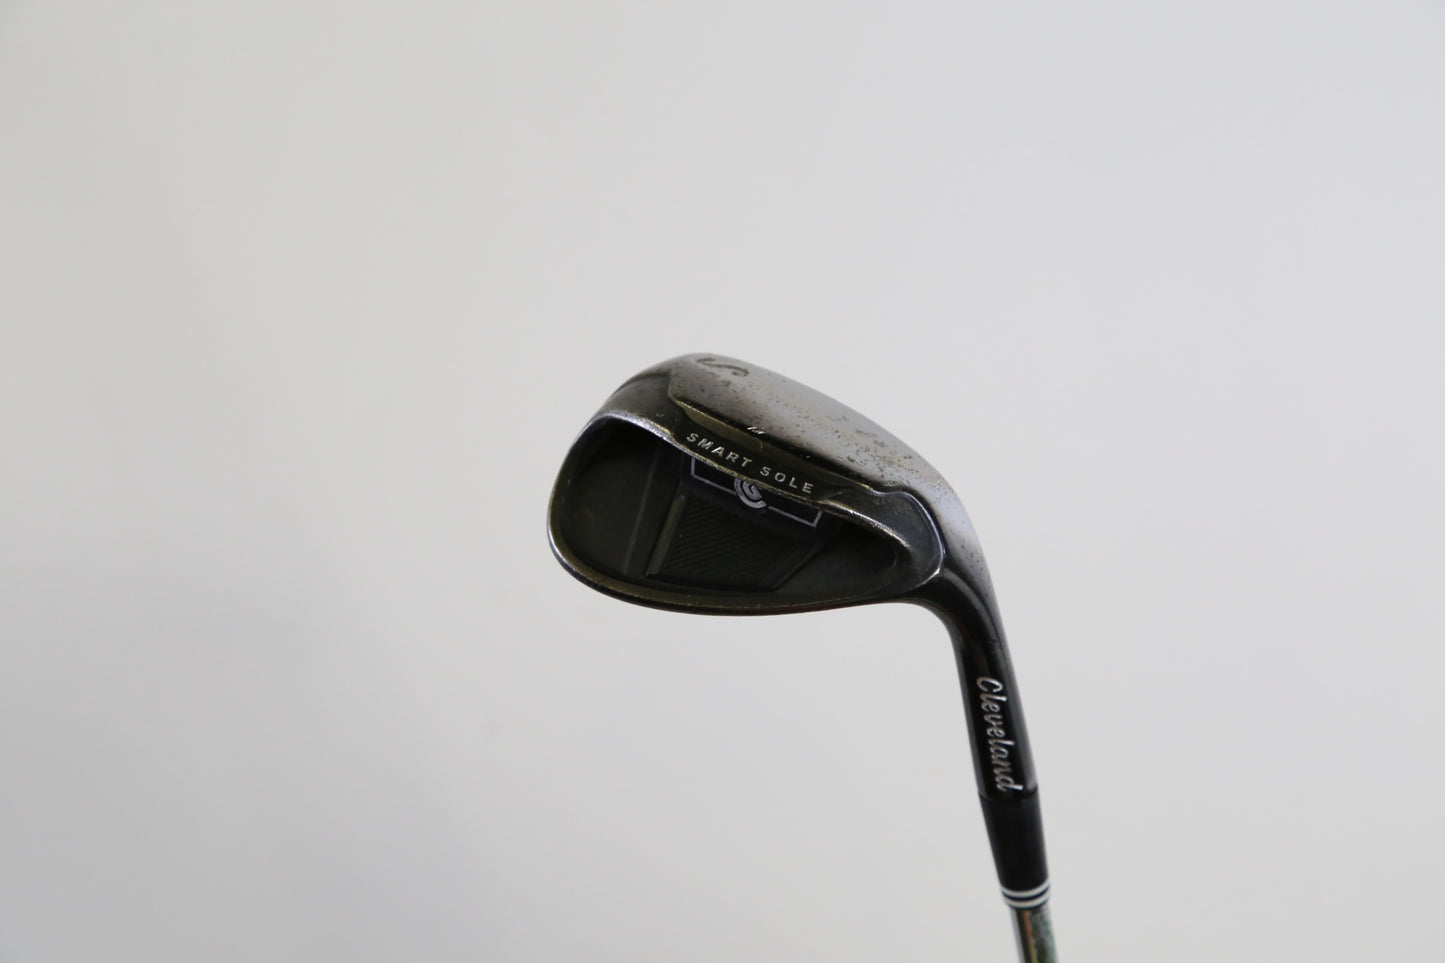 Used Cleveland Smart Sole S 2.0 Sand Wedge - Right-Handed - 58 Degrees - Stiff Flex